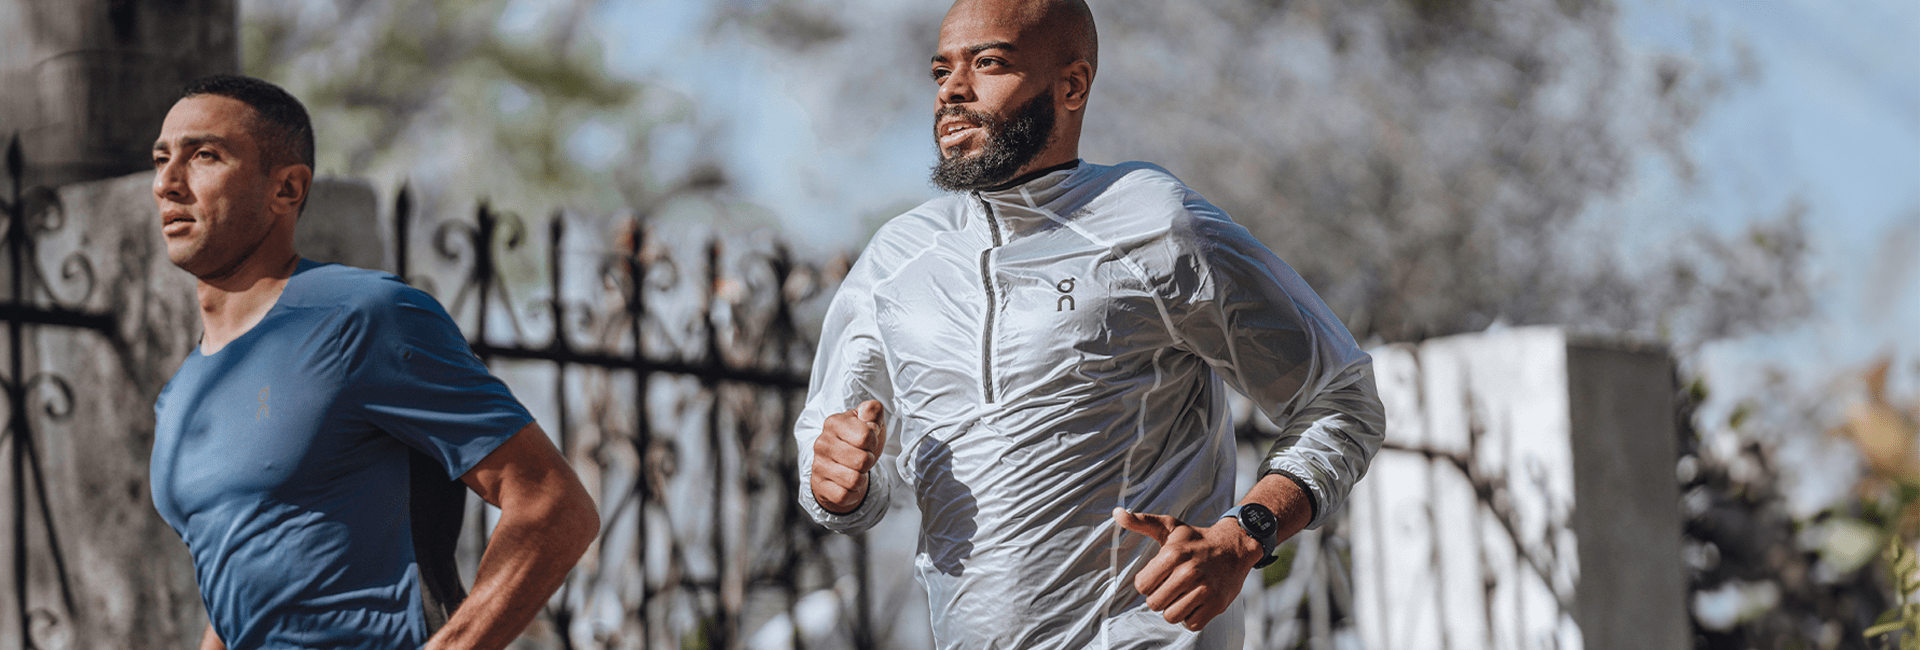 The Best Gear for Running a Marathon, According to a Running Coach